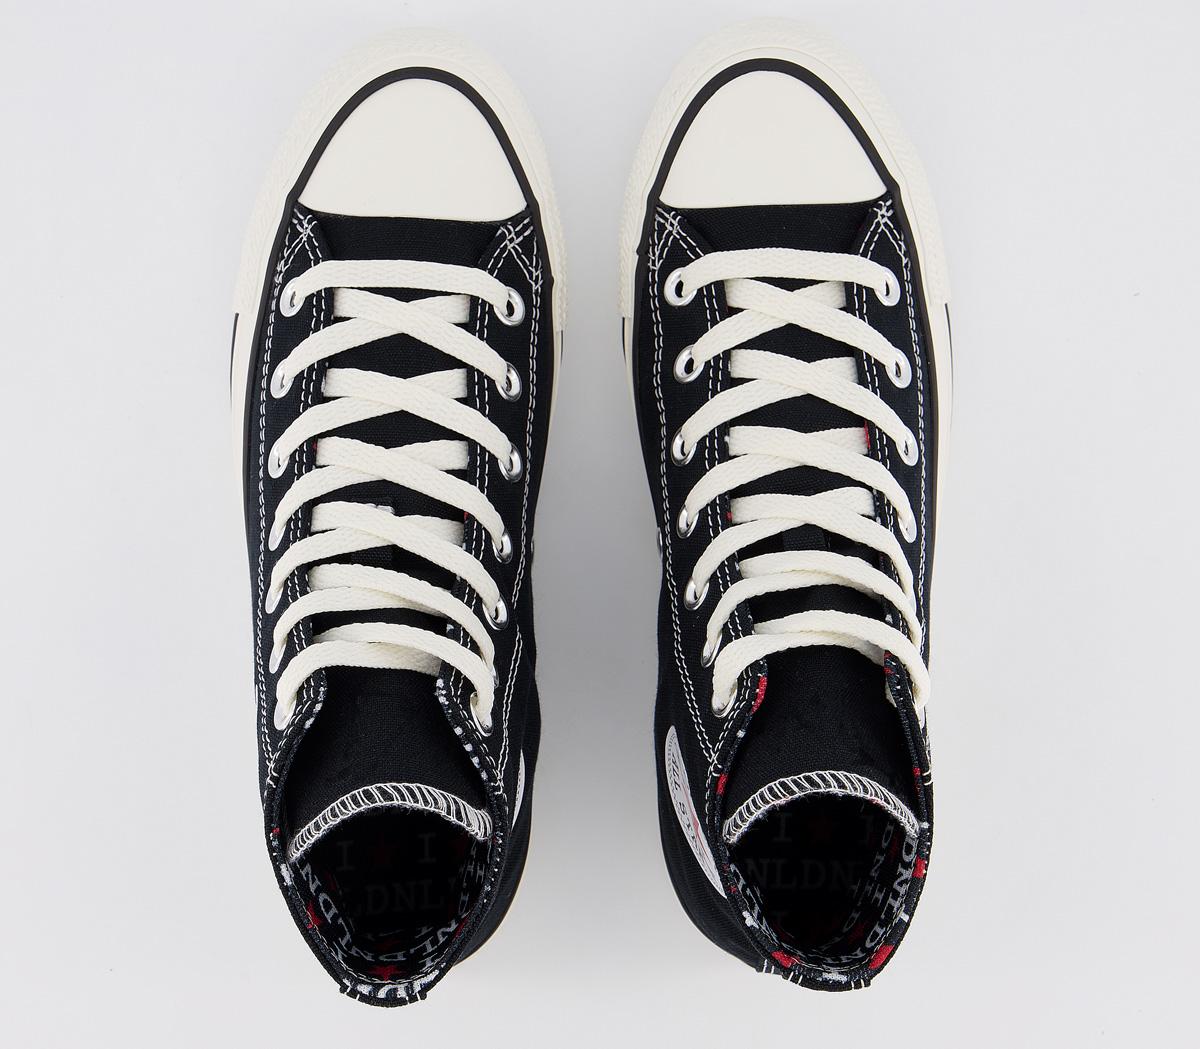 Converse Converse All Star Hi Trainers Black White Enamel Red I Star